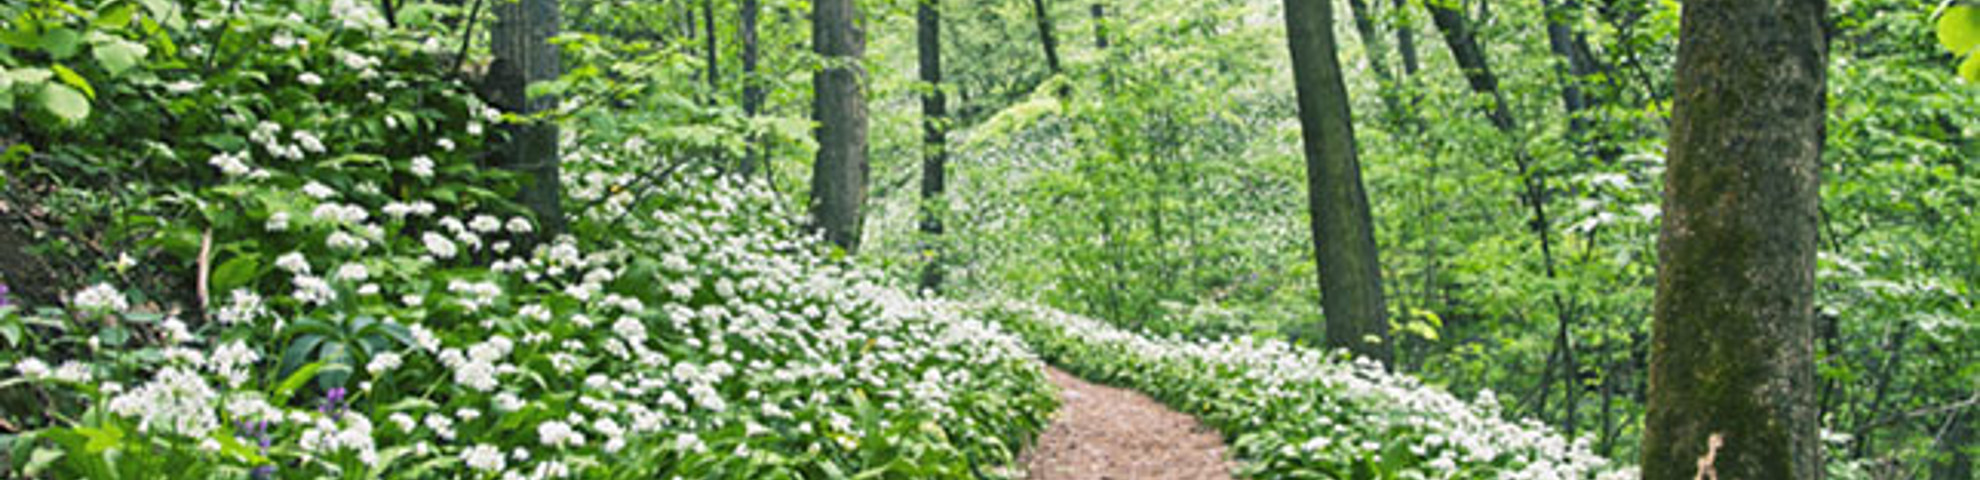 A path in the woods surrounded by trees and greenery, with small white flowers. 